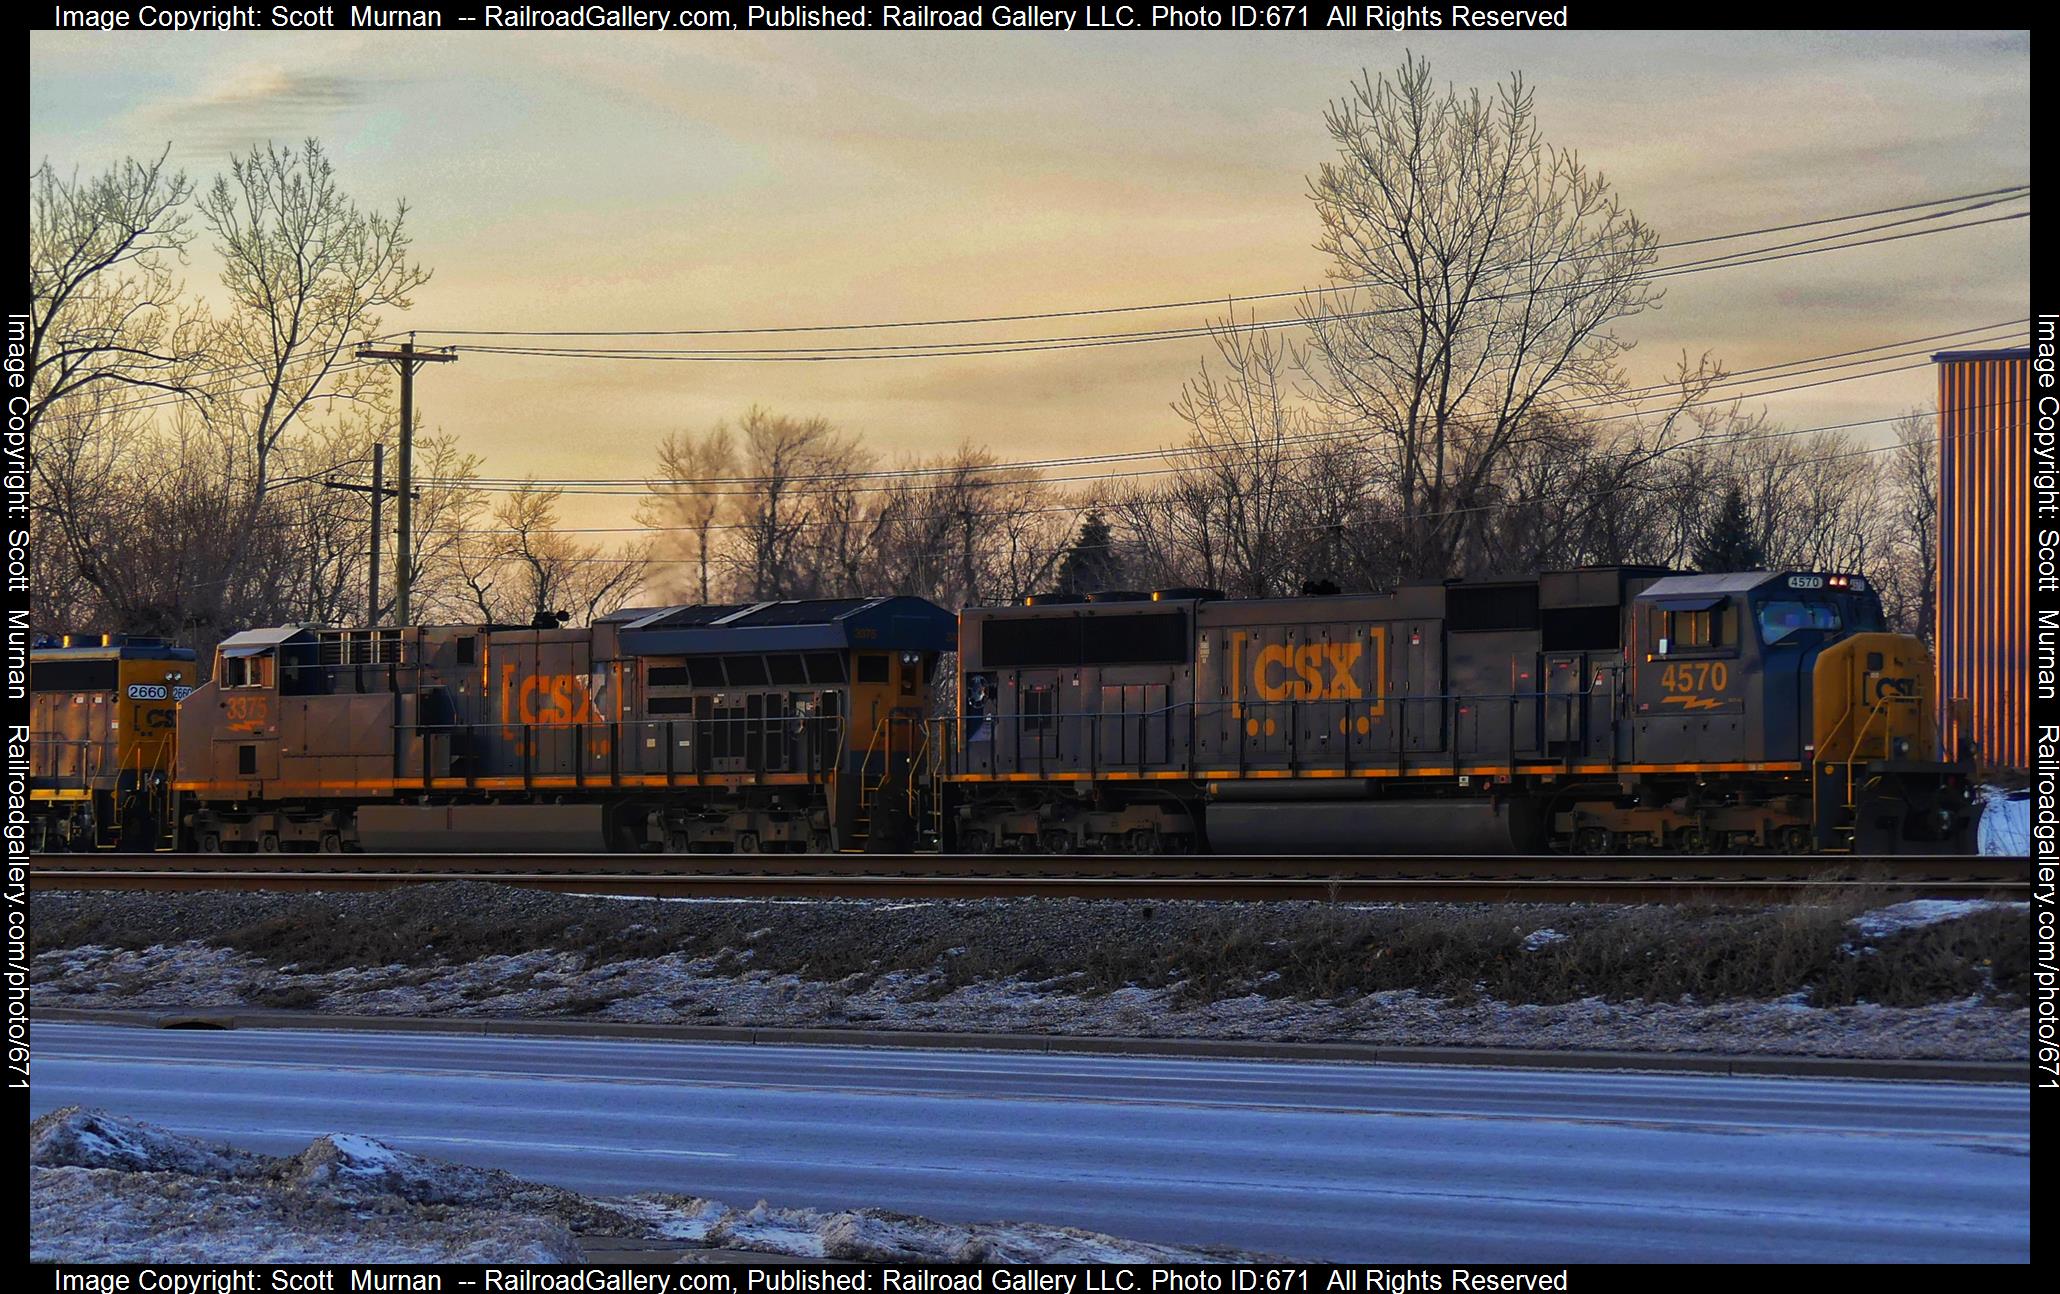 CSX 4570 is a class EMD SD70MAC and  is pictured in Buffalo , New York, United States.  This was taken along the Buffalo Terminal Subdivision  on the CSX Transportation. Photo Copyright: Scott  Murnan  uploaded to Railroad Gallery on 02/06/2023. This photograph of CSX 4570 was taken on Saturday, February 04, 2023. All Rights Reserved. 